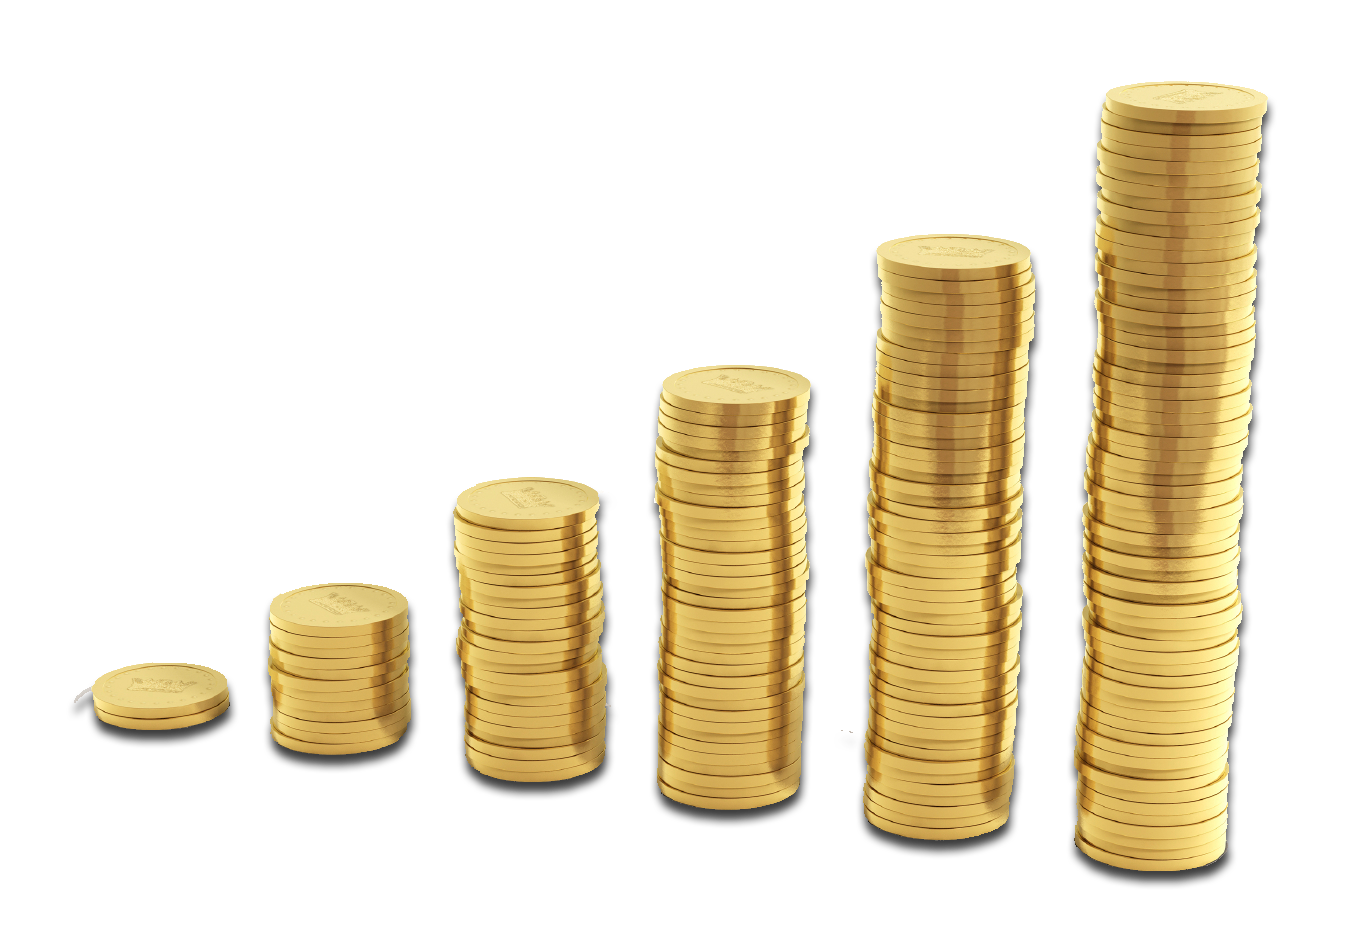 Coins Png Pic - Coin Border, Transparent background PNG HD thumbnail